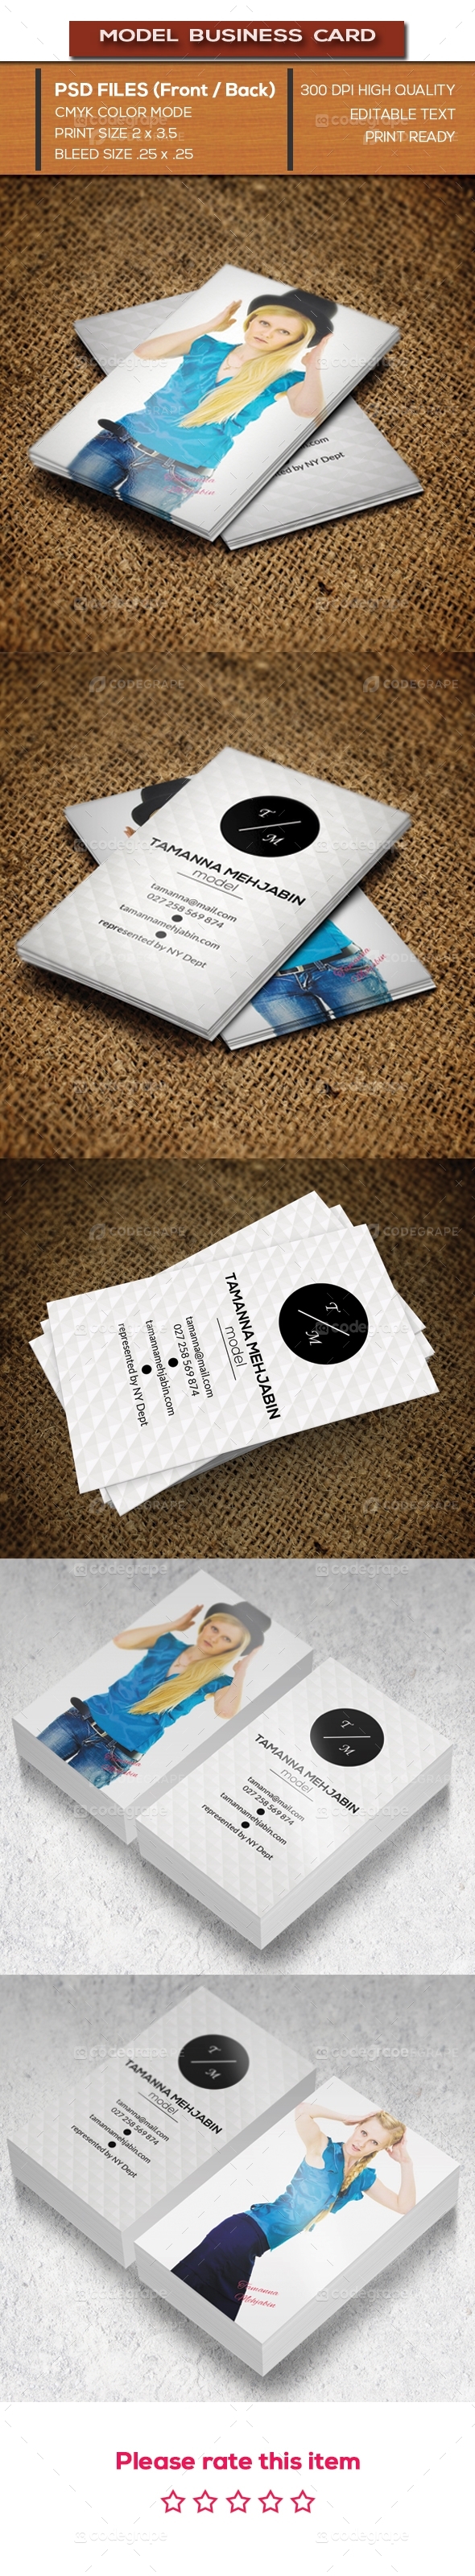 Model Business Card